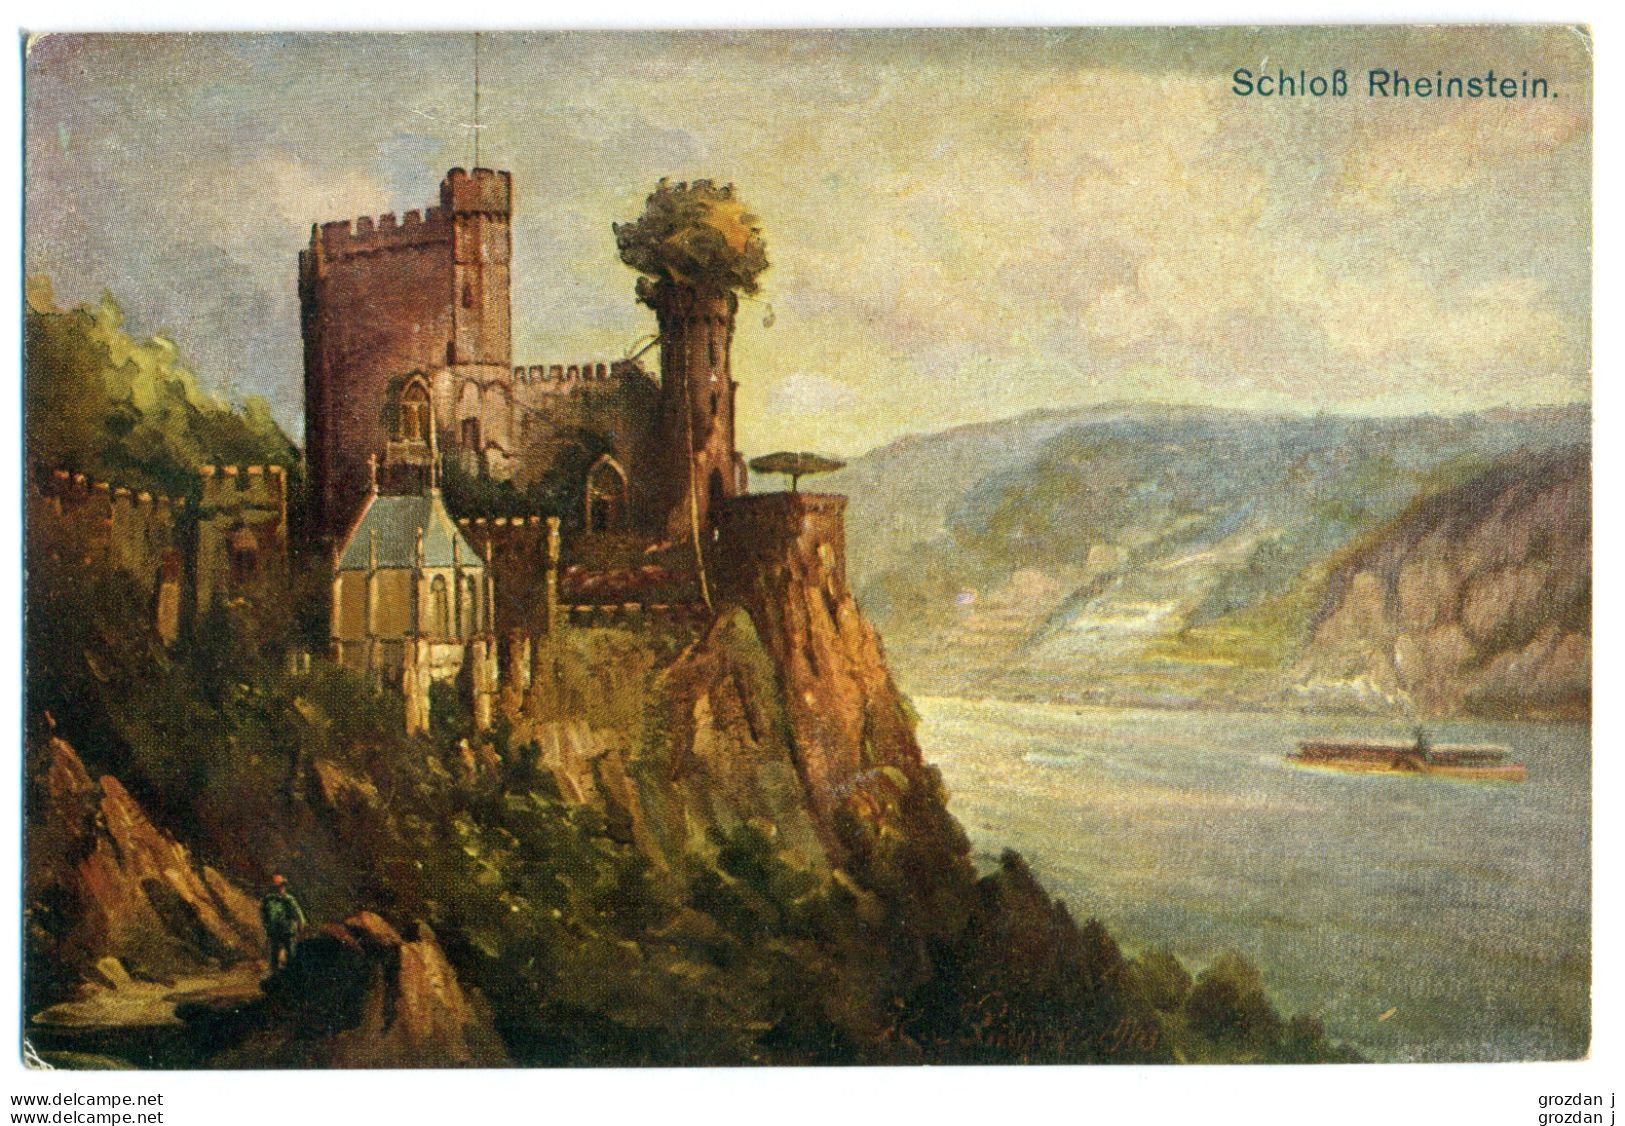 SPRING-CLEANING LOT (39 POSTCARDS), Places along the Rhine, Art postcards, Germany